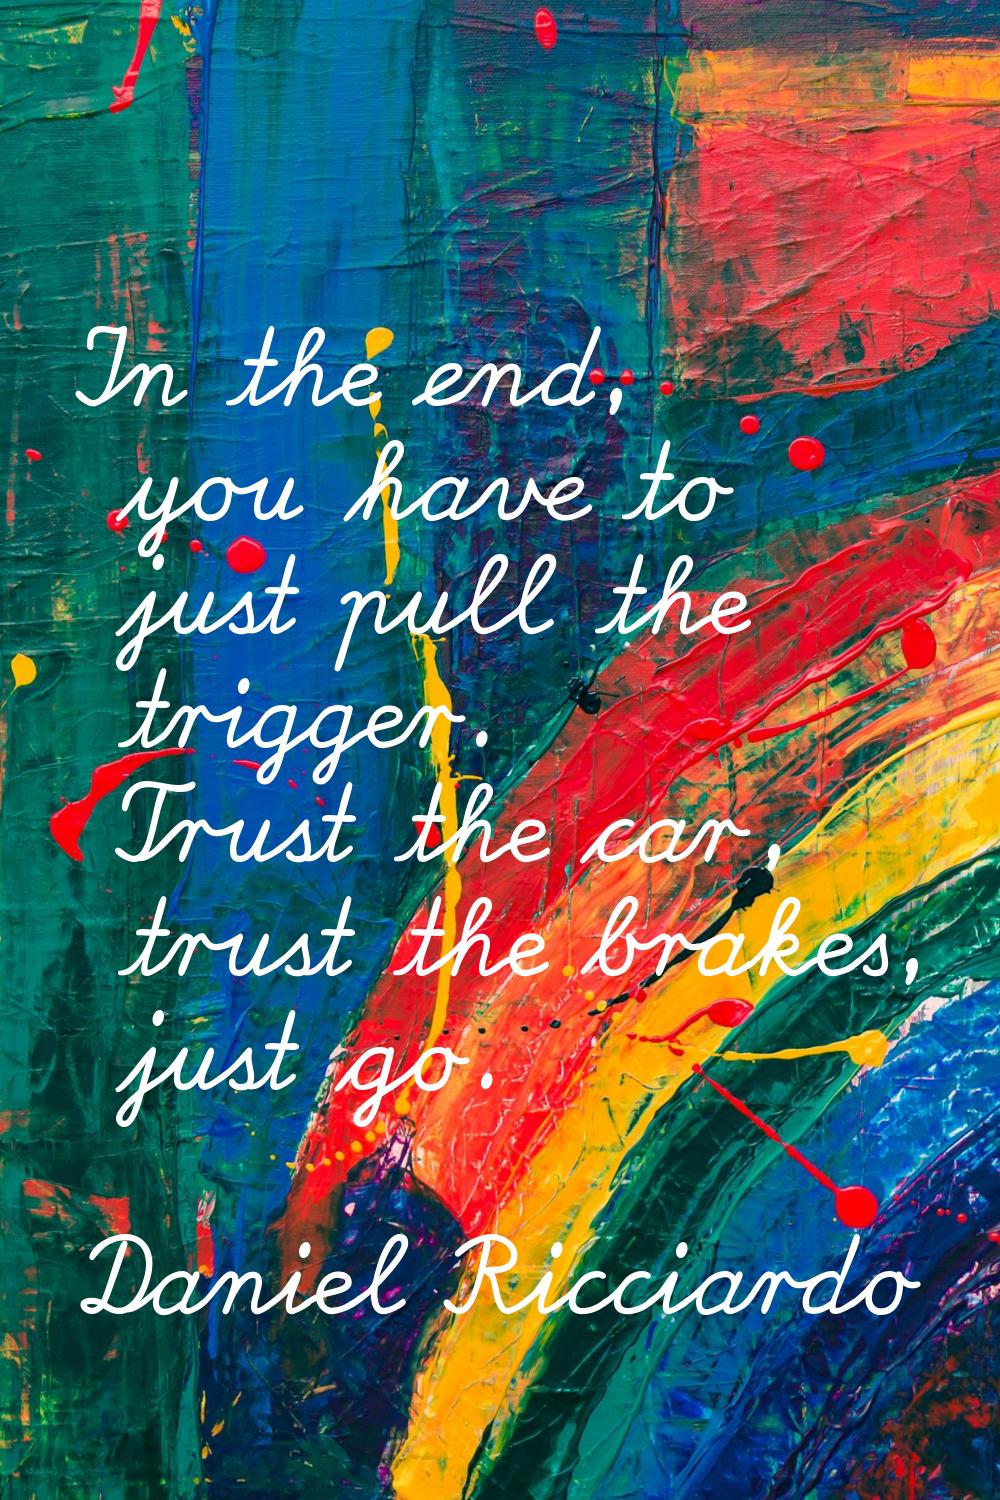 In the end, you have to just pull the trigger. Trust the car, trust the brakes, just go.